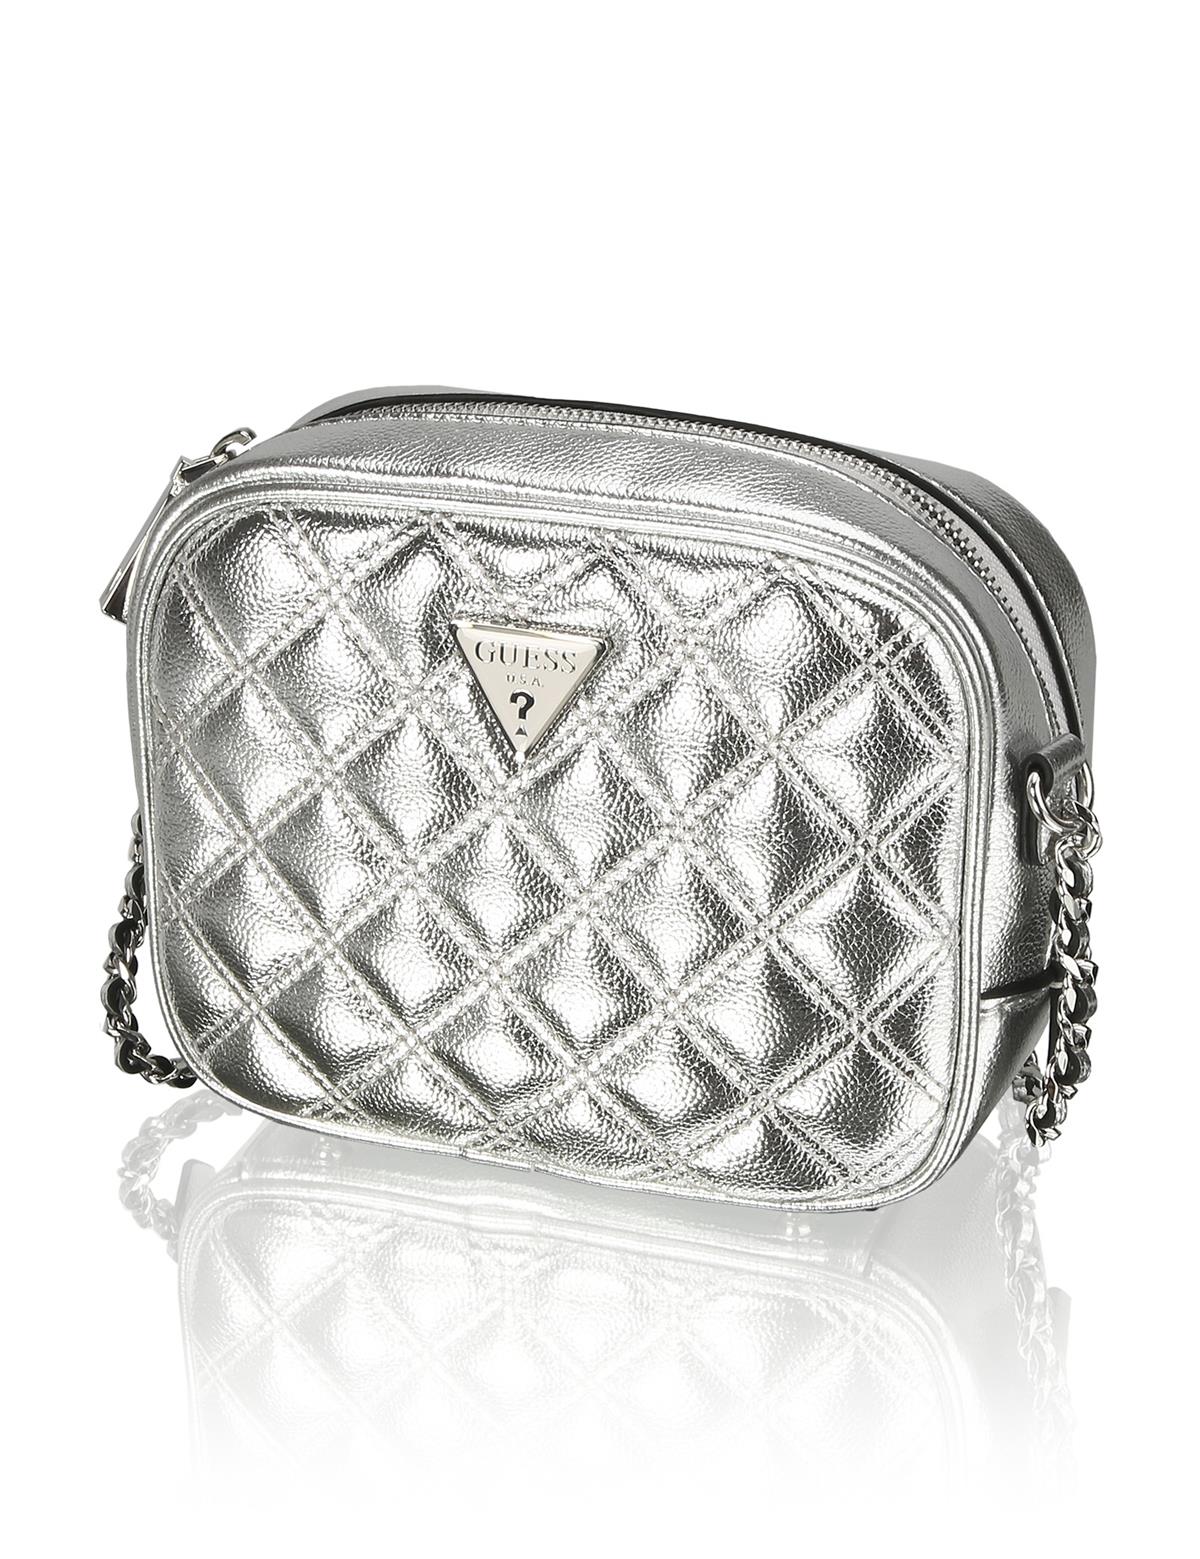 HUMANIC 29 Guess Quilted Bag EUR 99,95 6131402474